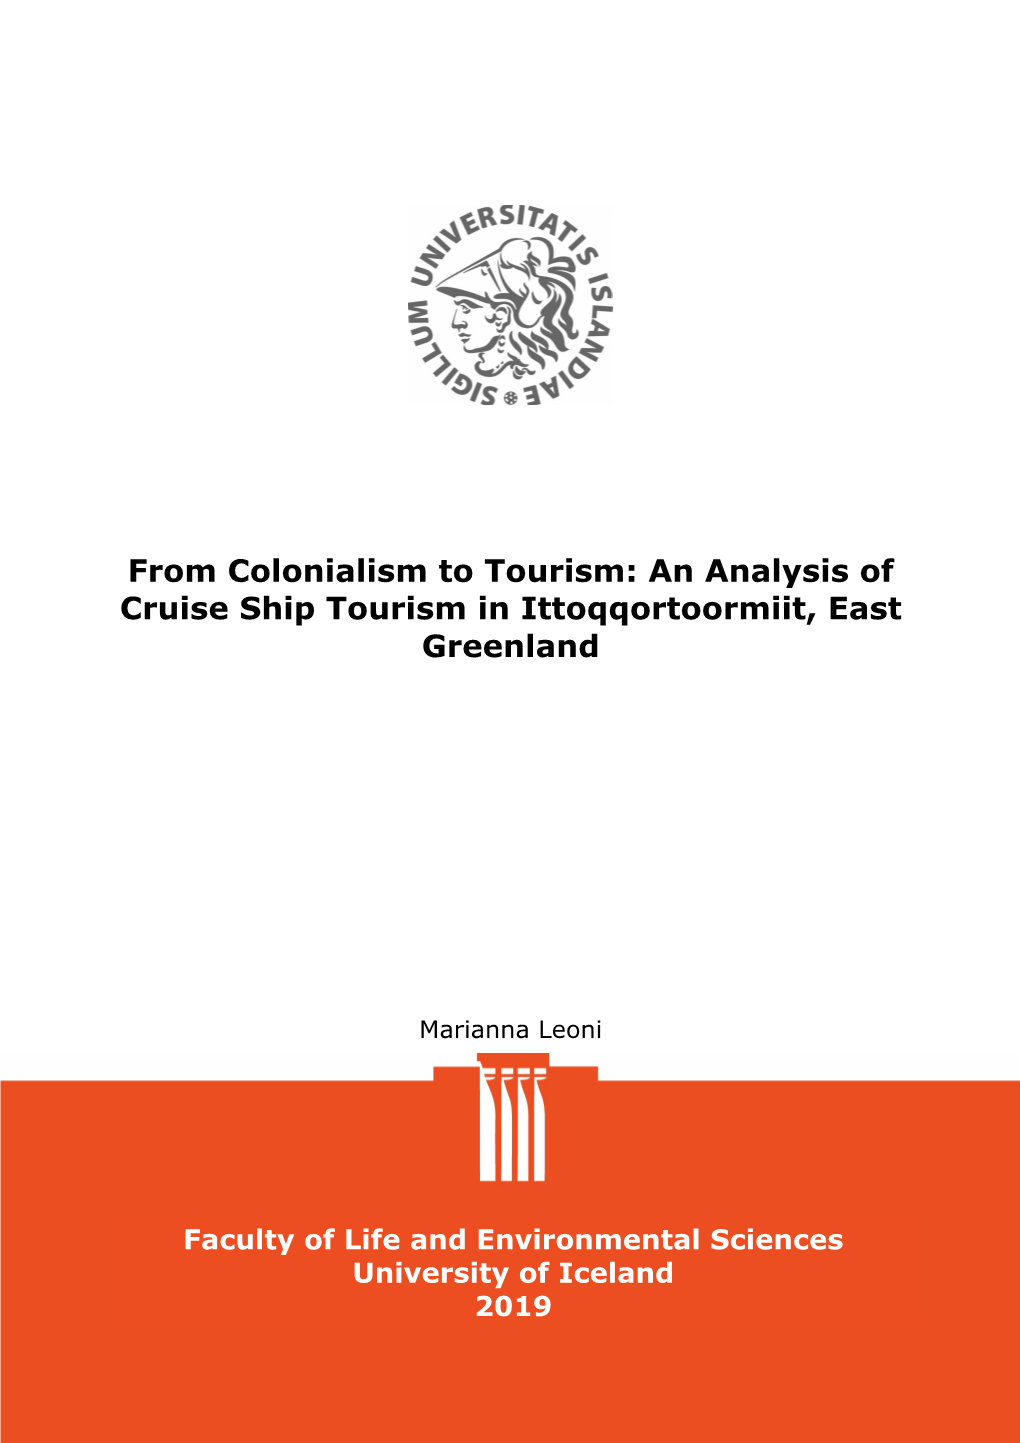 An Analysis of Cruise Ship Tourism in Ittoqqortoormiit, East Greenland